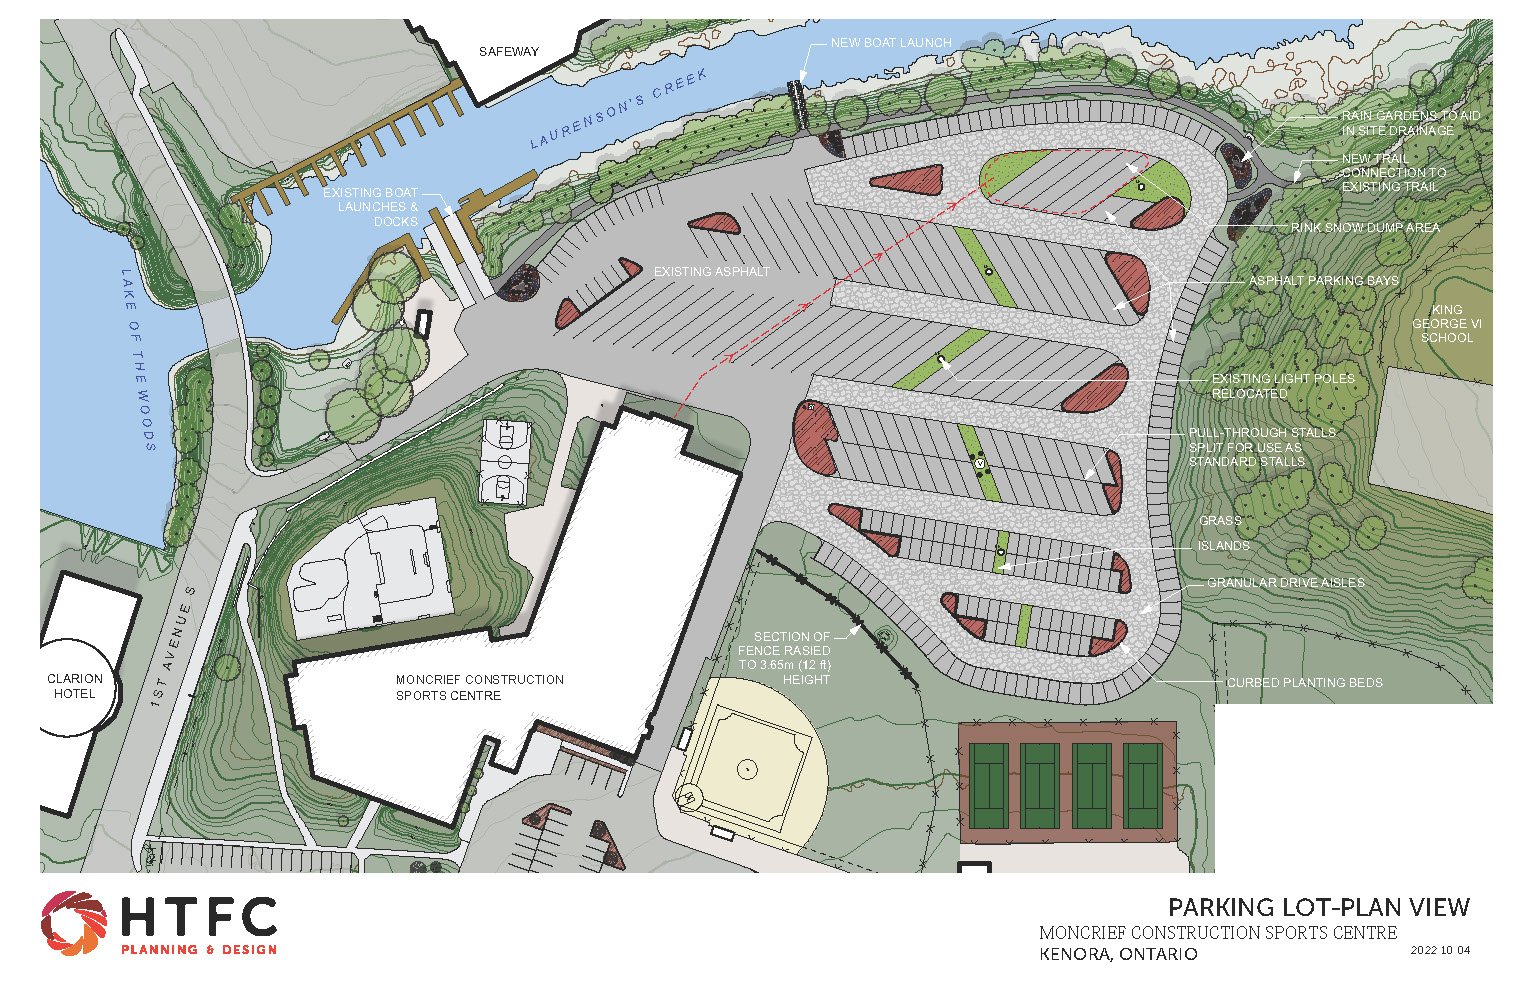 map of grounds at recreation centre showing construction project areas